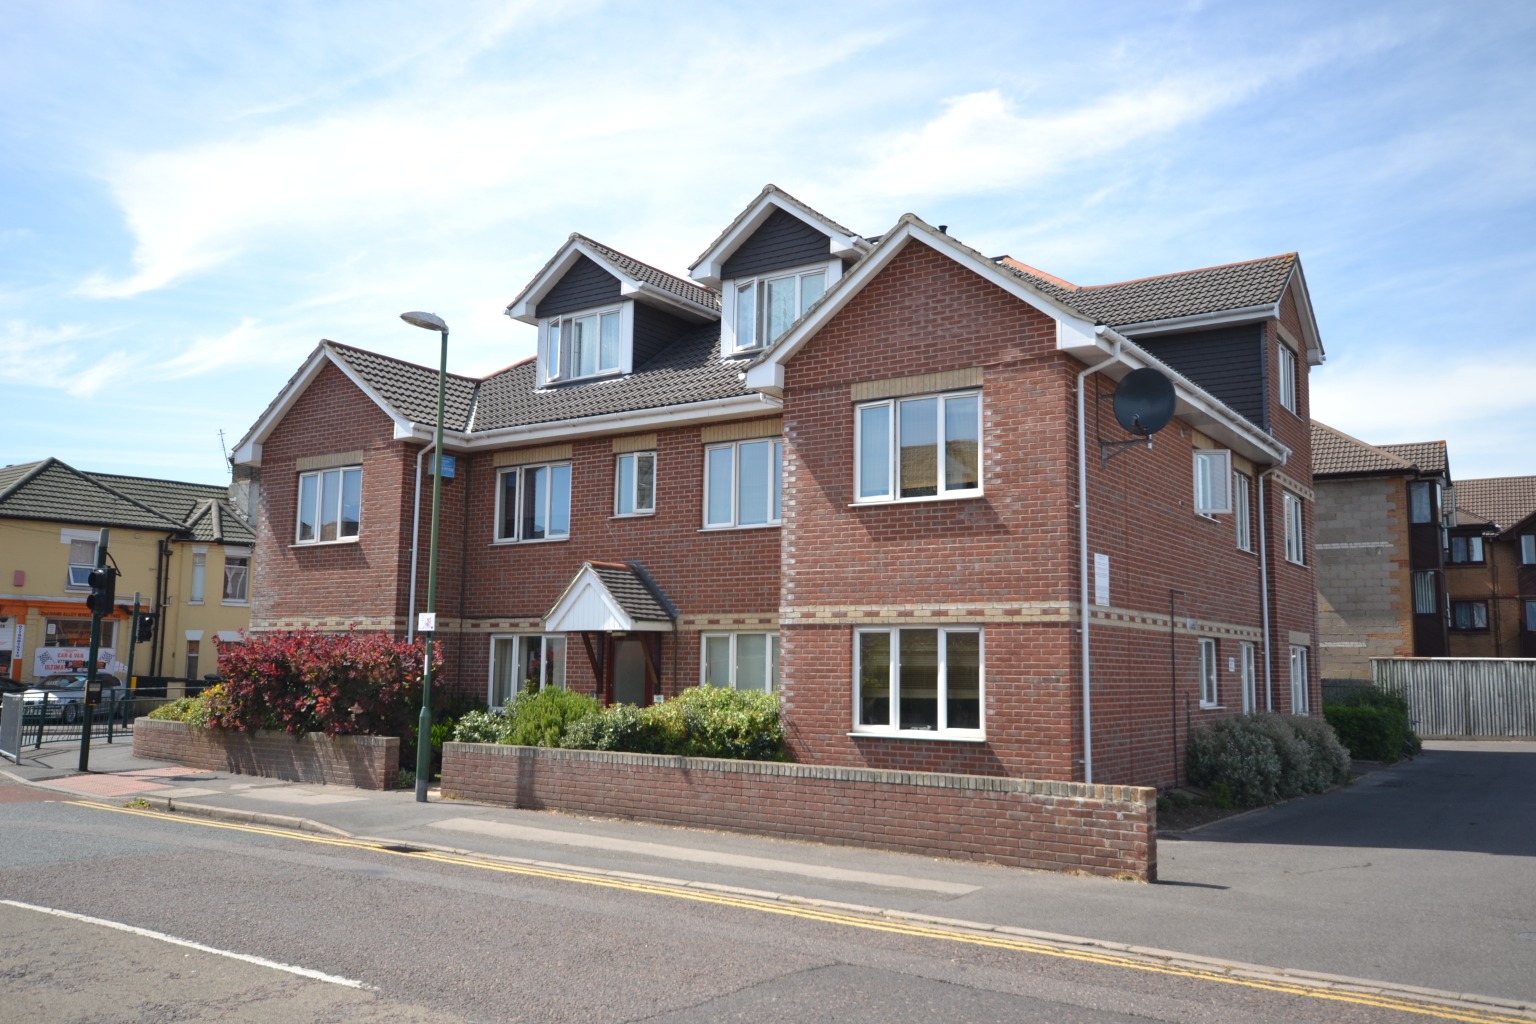 2 bed flat for sale in Primrose Court, Bournemouth - Property Image 1